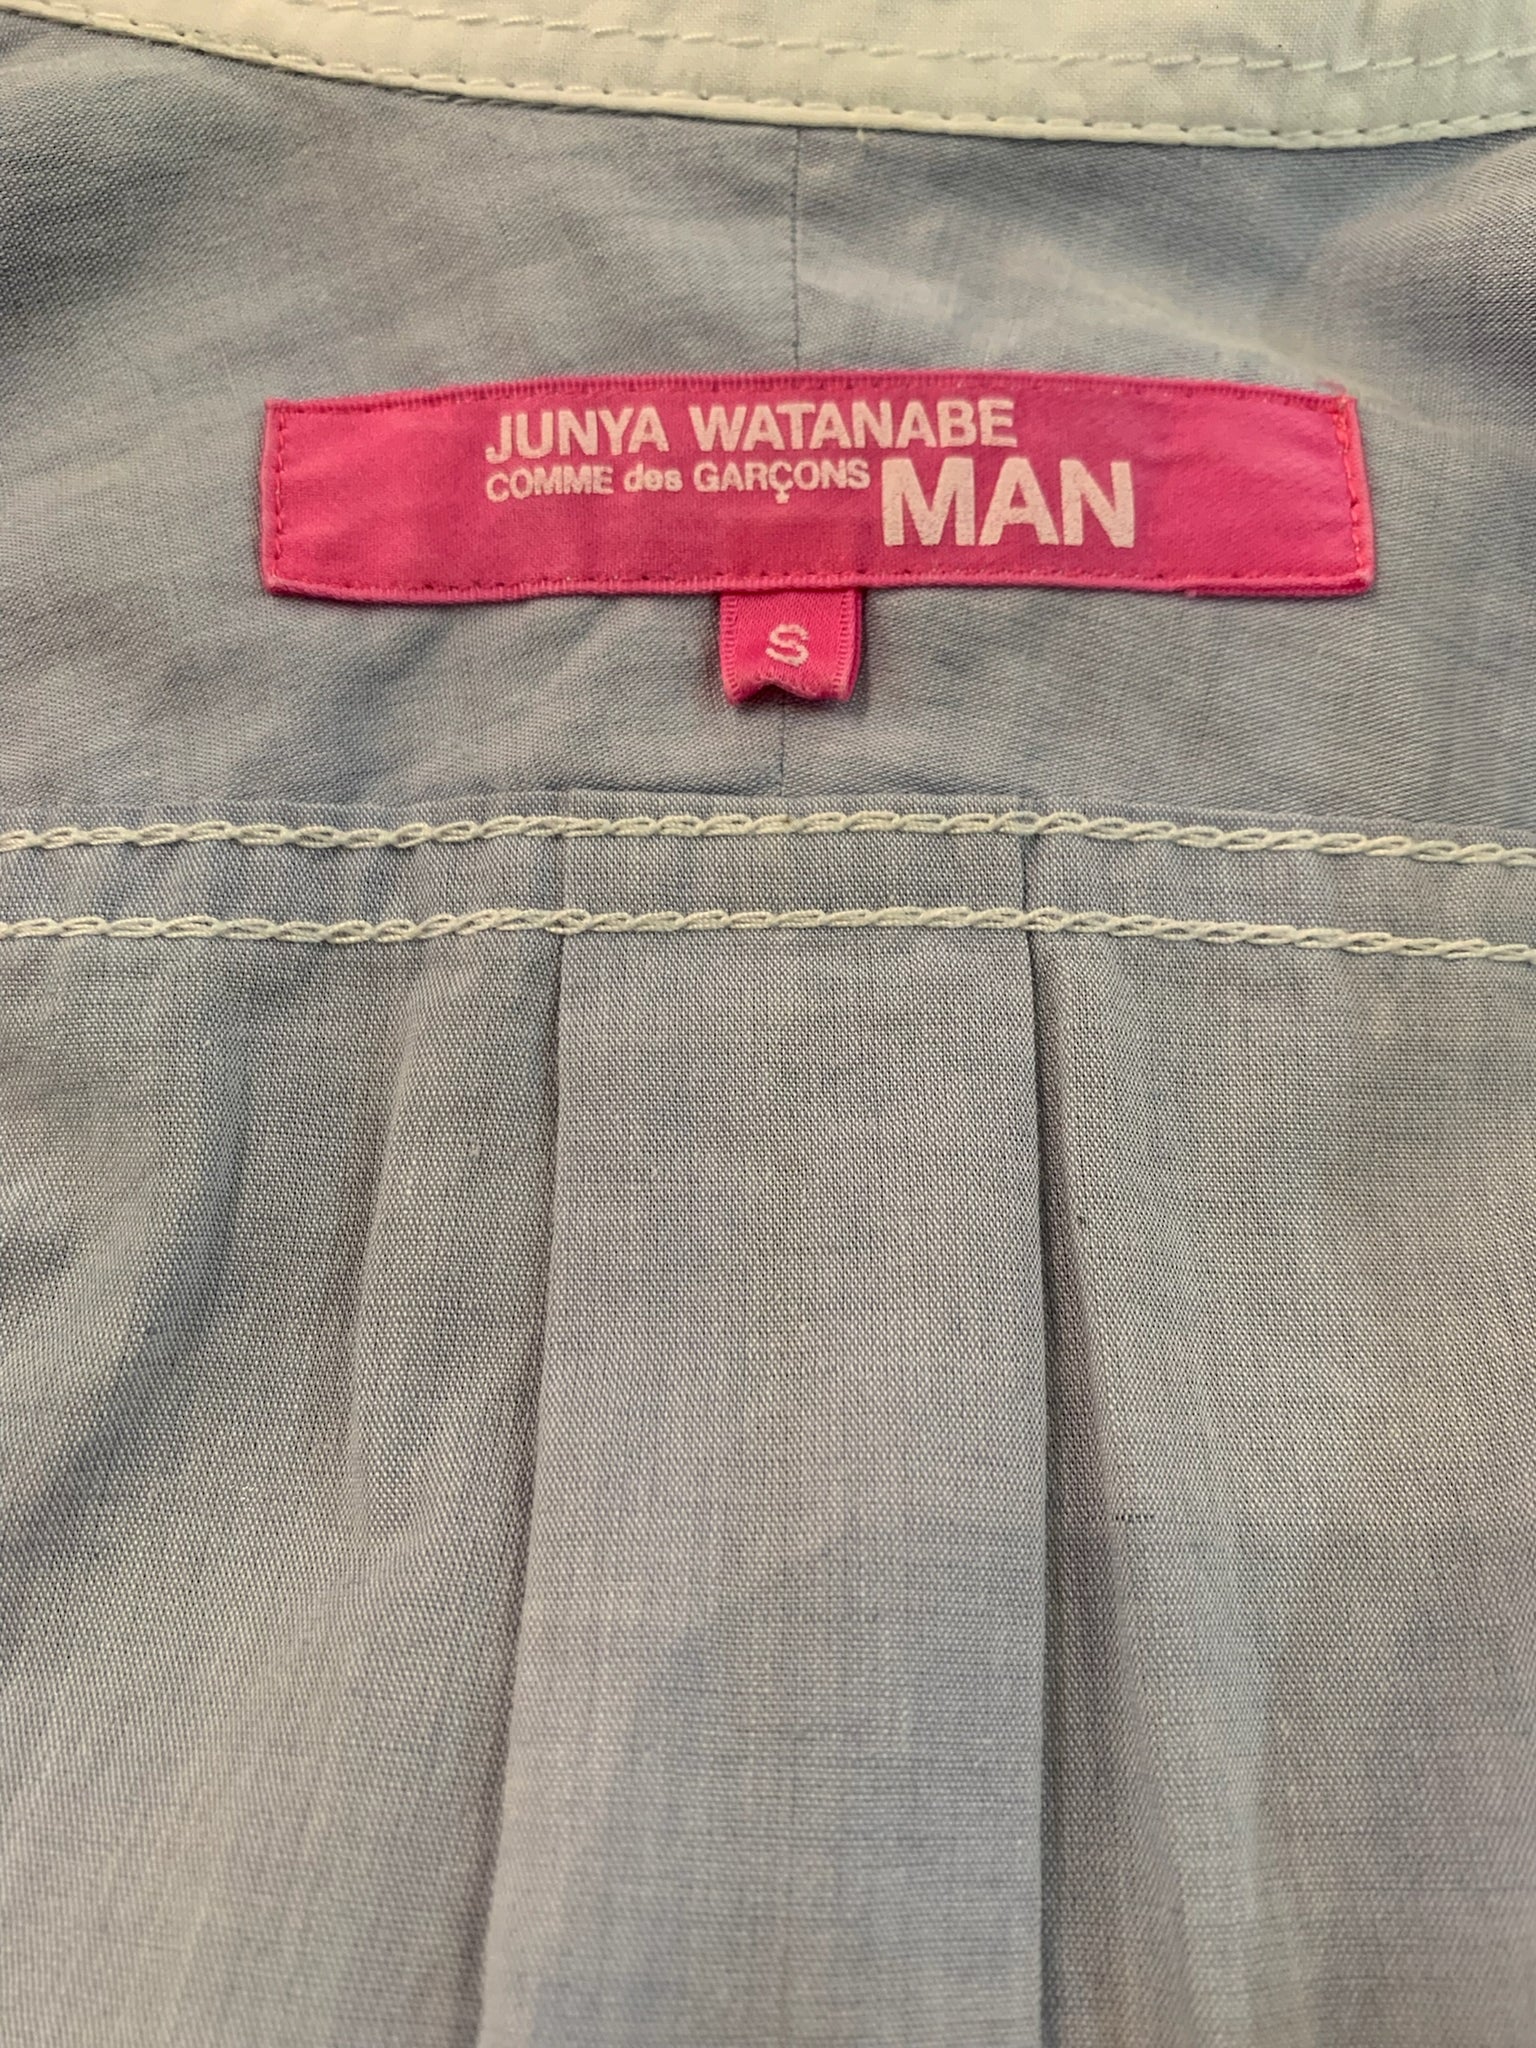  Junya Watanabe for Comme des Garcons 2011 Chambray Patchwork Shirt Dress LABEL 5 of 5